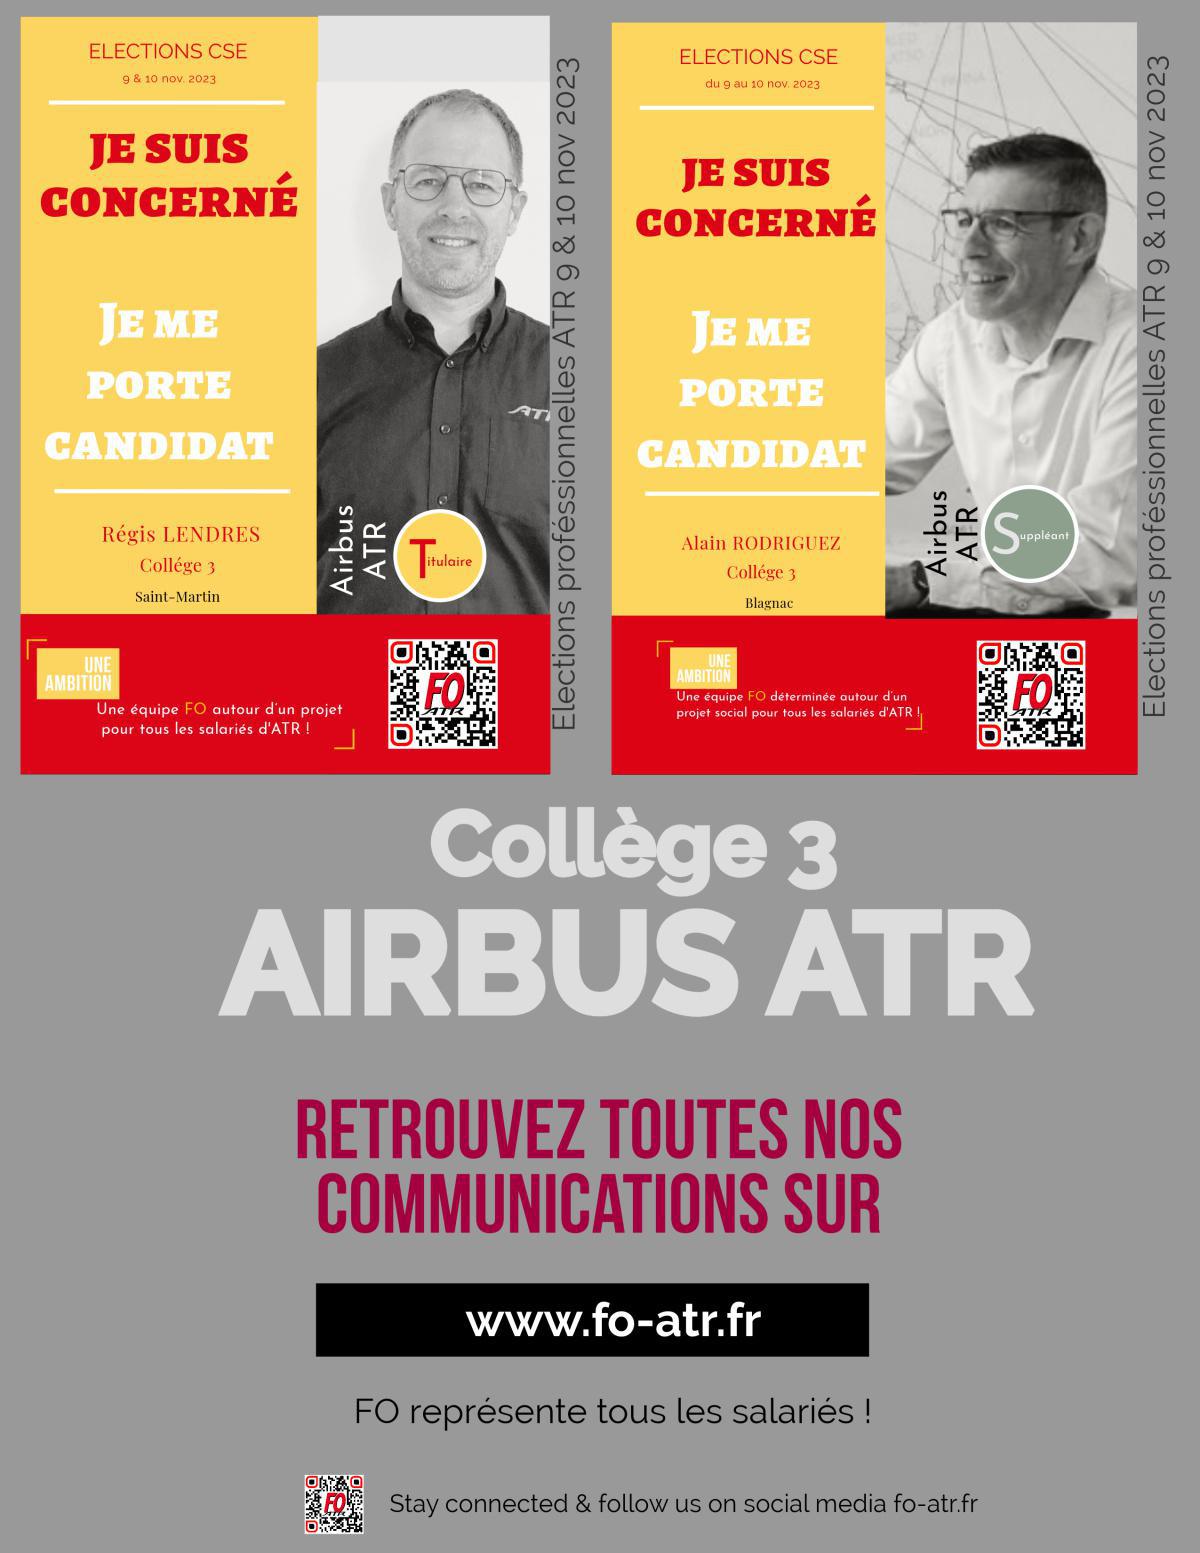 J-3 : Airbus ATR, vos candidat(e)s FO (collège 2 & 3)